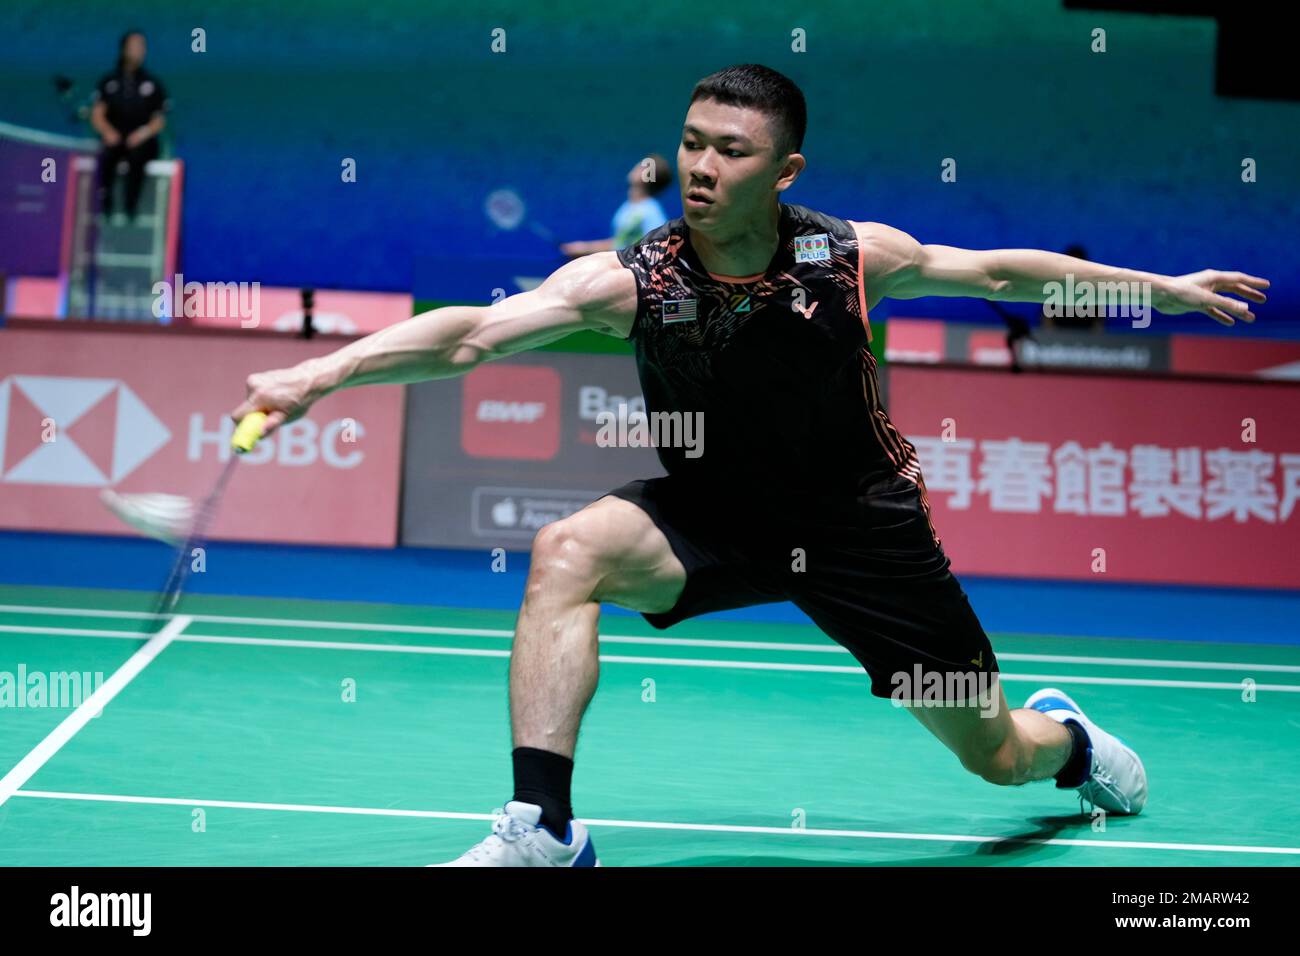 Lee Zii Jia of Malaysia plays a return against Brice Leverdez of France during a badminton game of the mens singles in the BWF World Championships in Tokyo, Monday, Aug